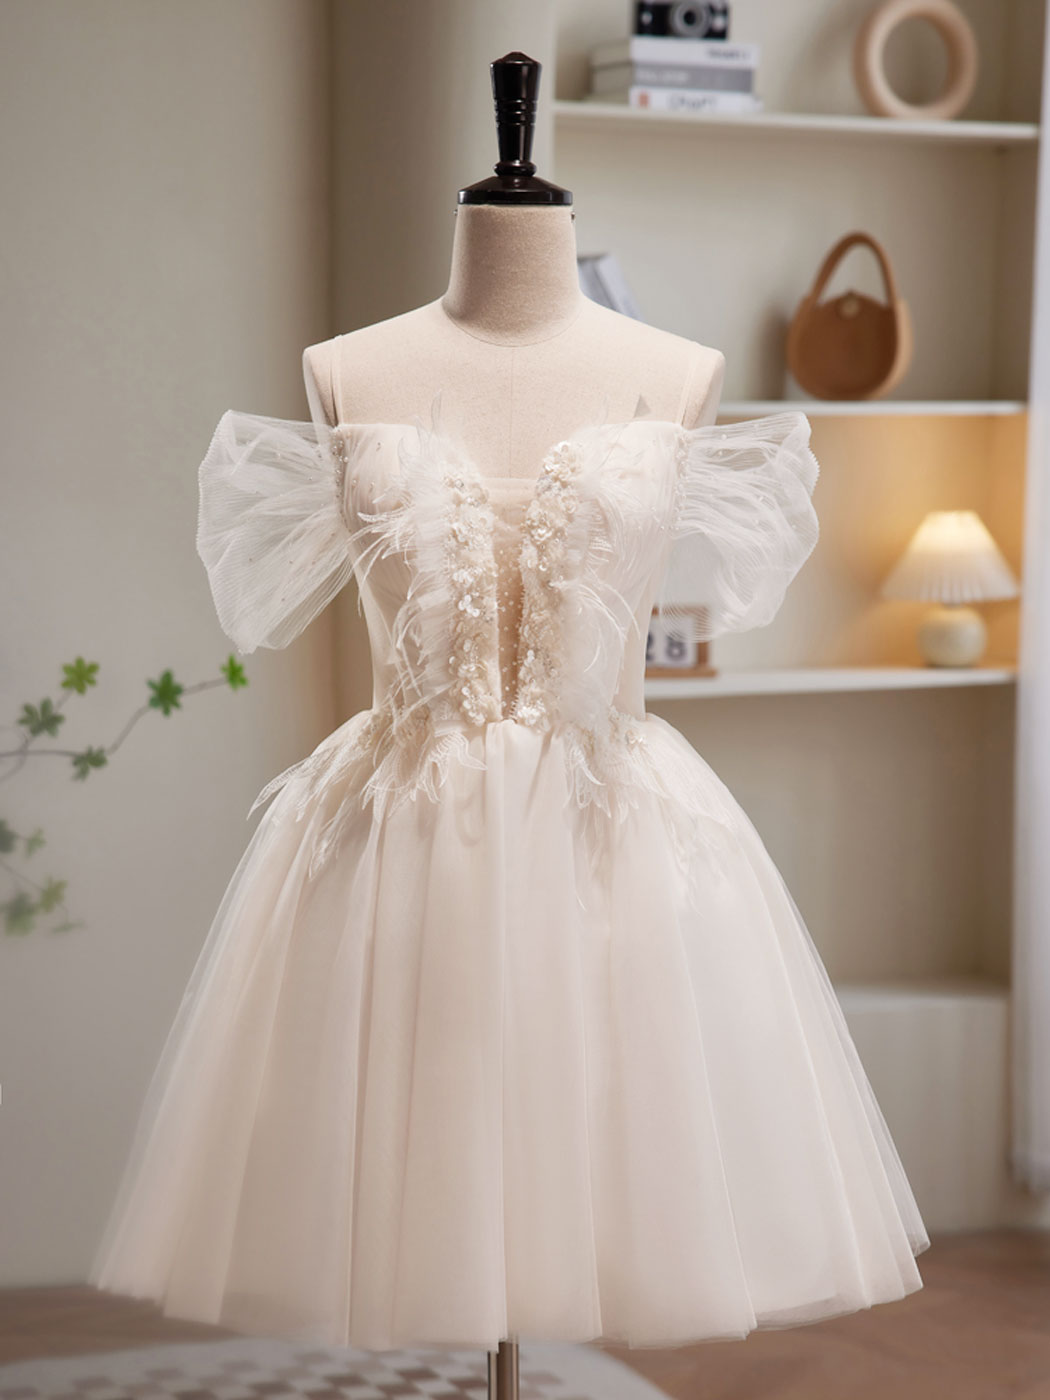 Adorable White Short Homecoming Dress Graduation Dress - DollyGown